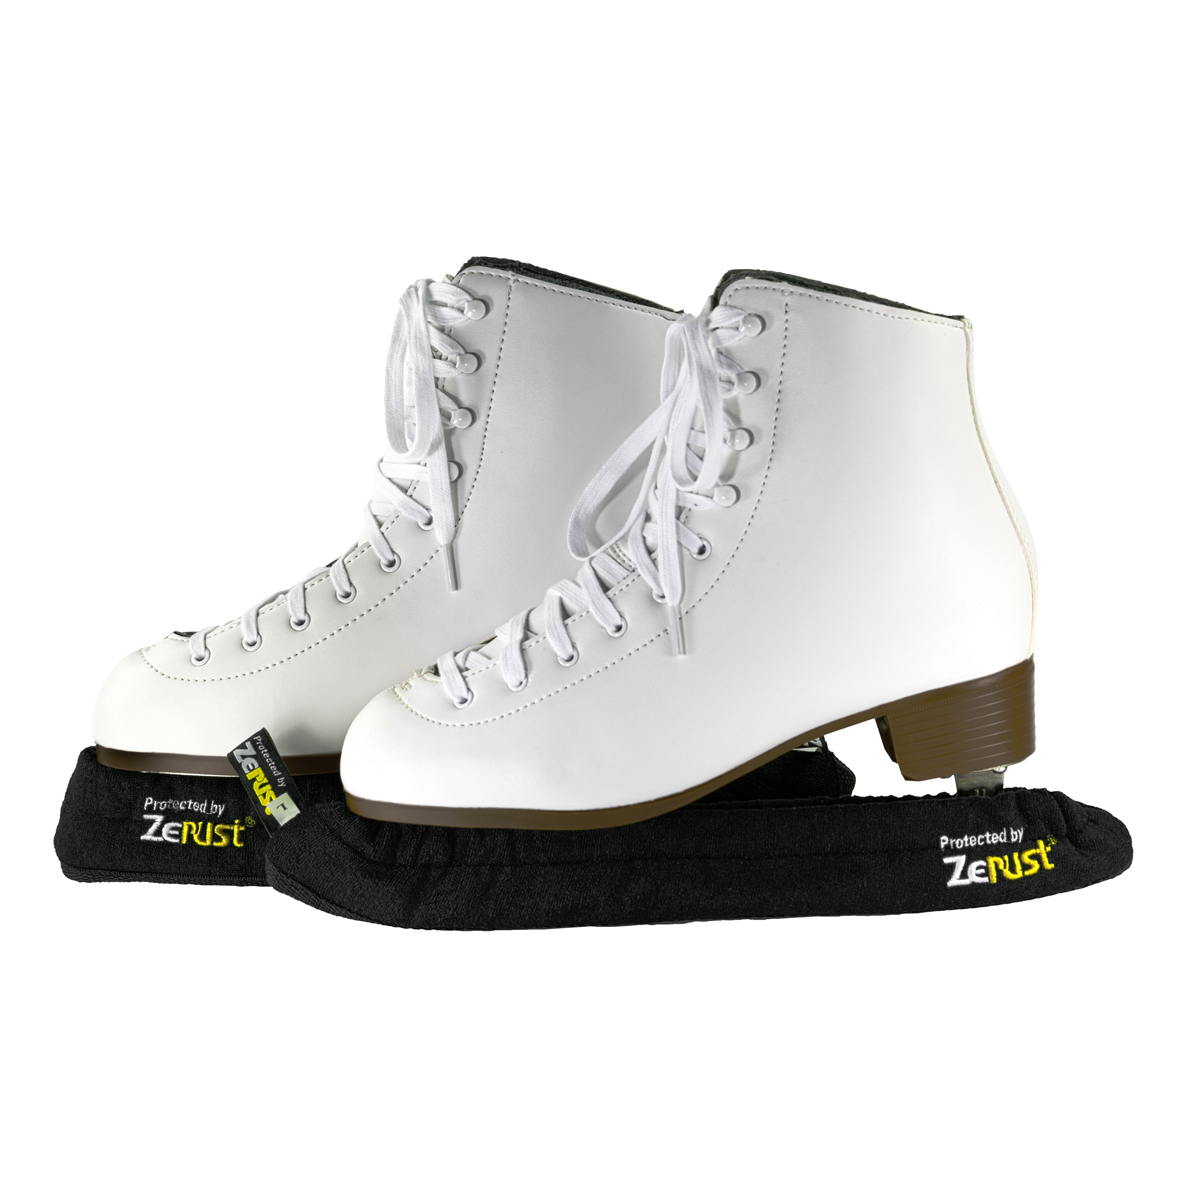 A pair of skates using ice skate blade covers.